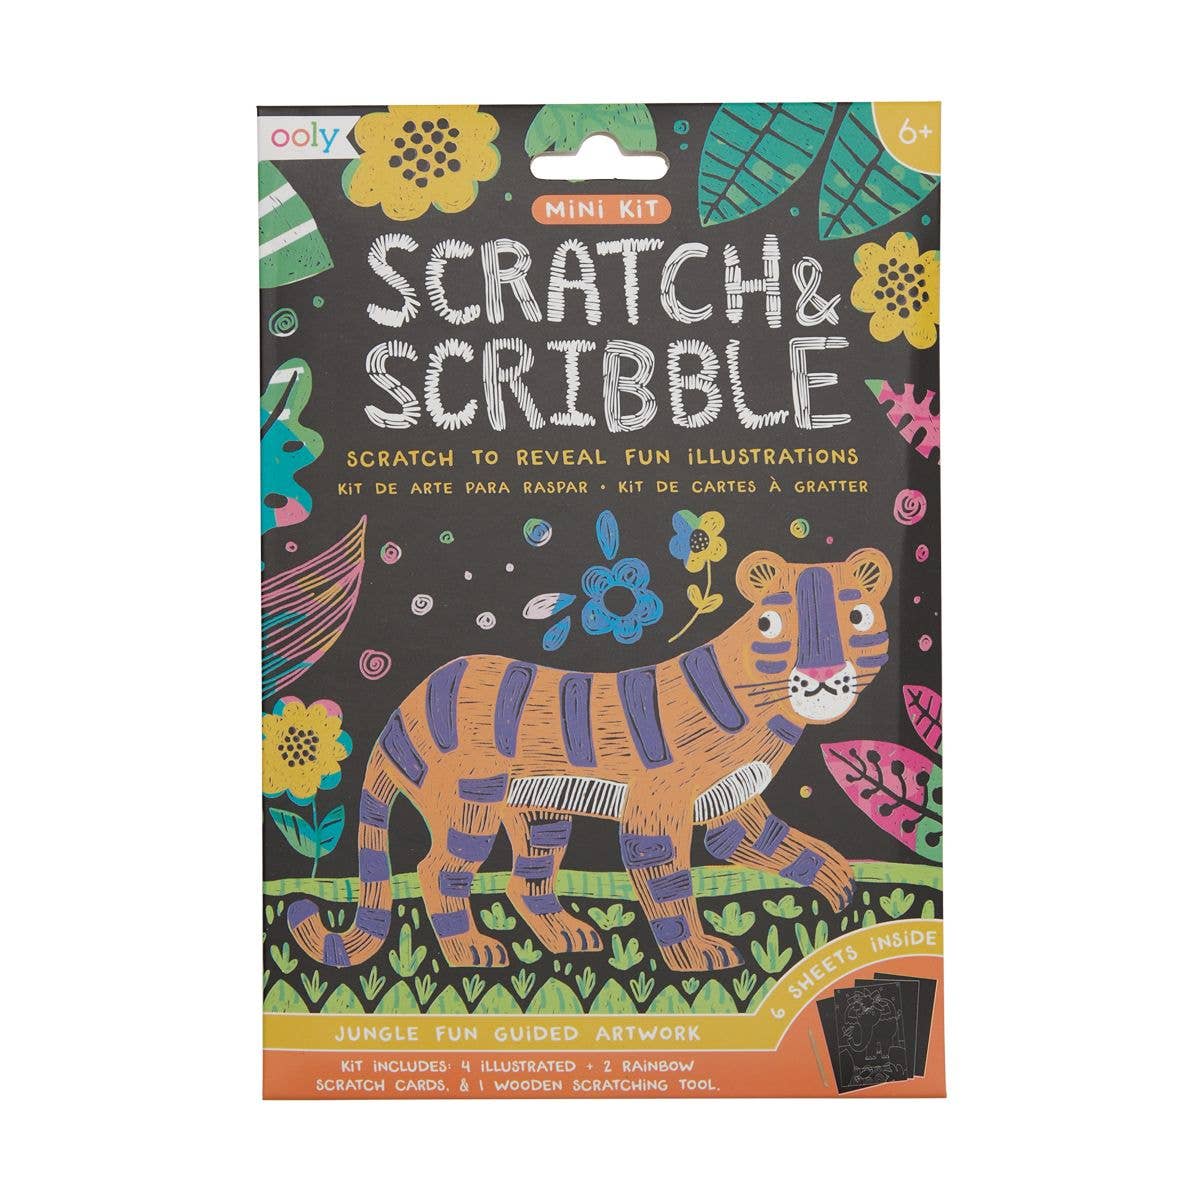 Sophisticated Art With Children's Art Supplies - OOLY